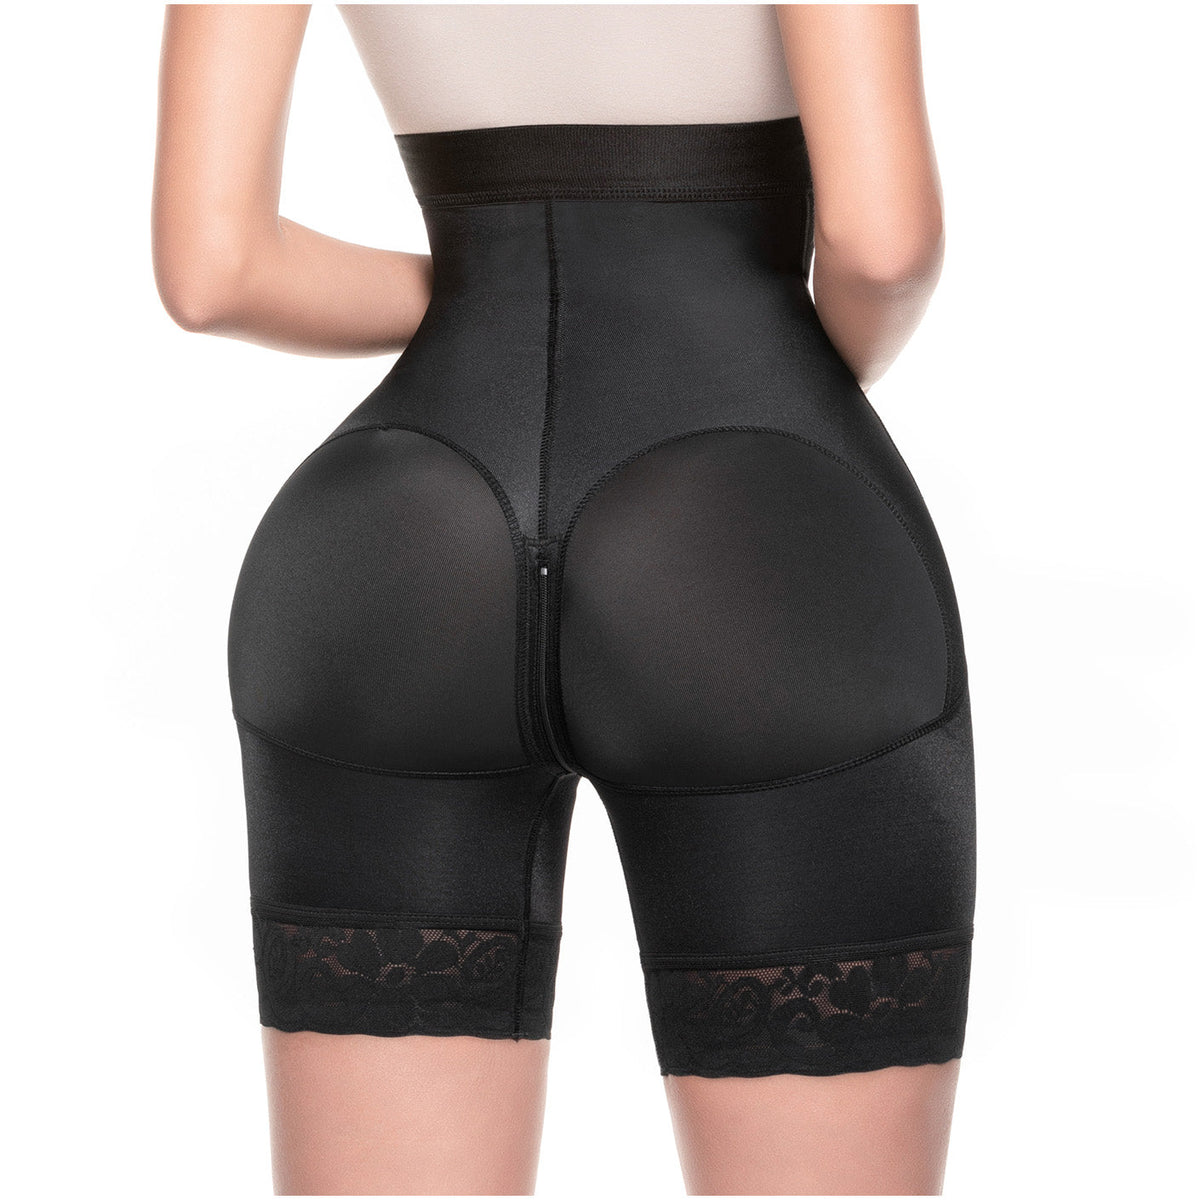 SONRYSE TR73ZF | High Rise Butt Lifting Shapewear Shorts for Women | Daily Use